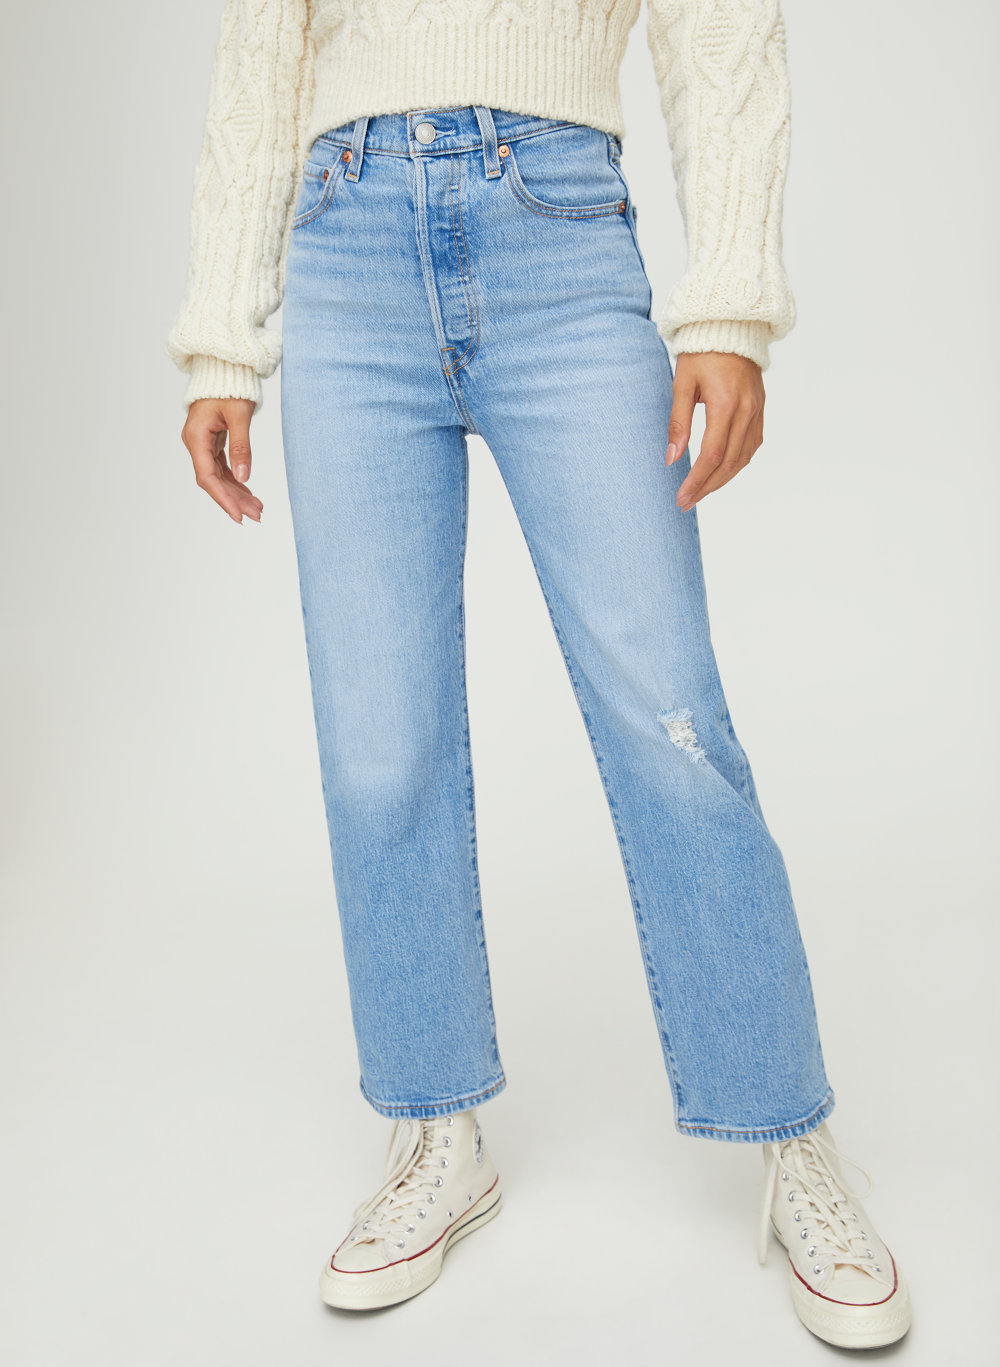 ribcage super high rise jeans